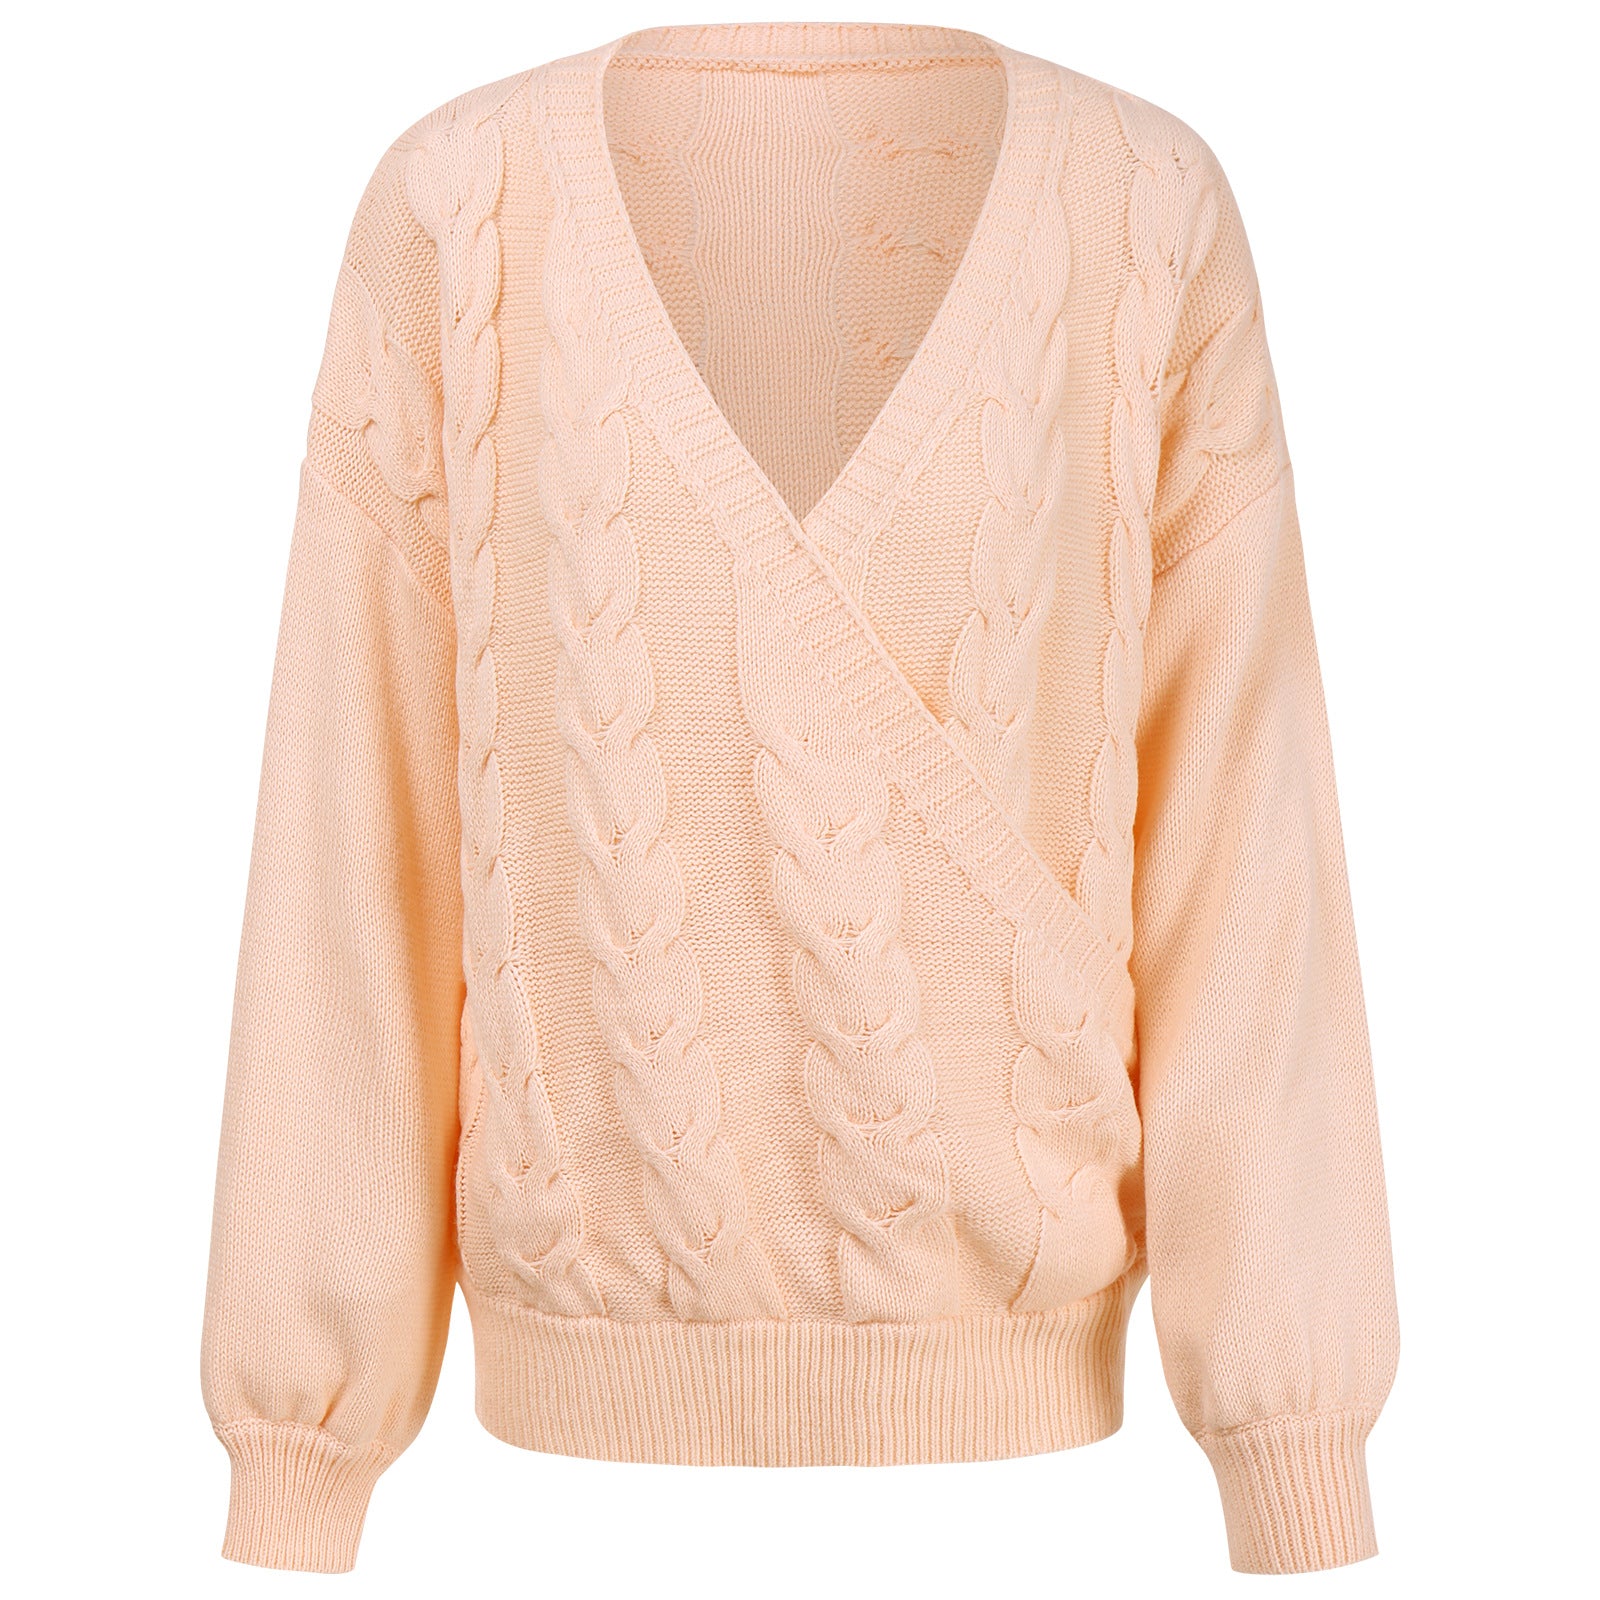 Women's V-neck Knitted Loose Sweater